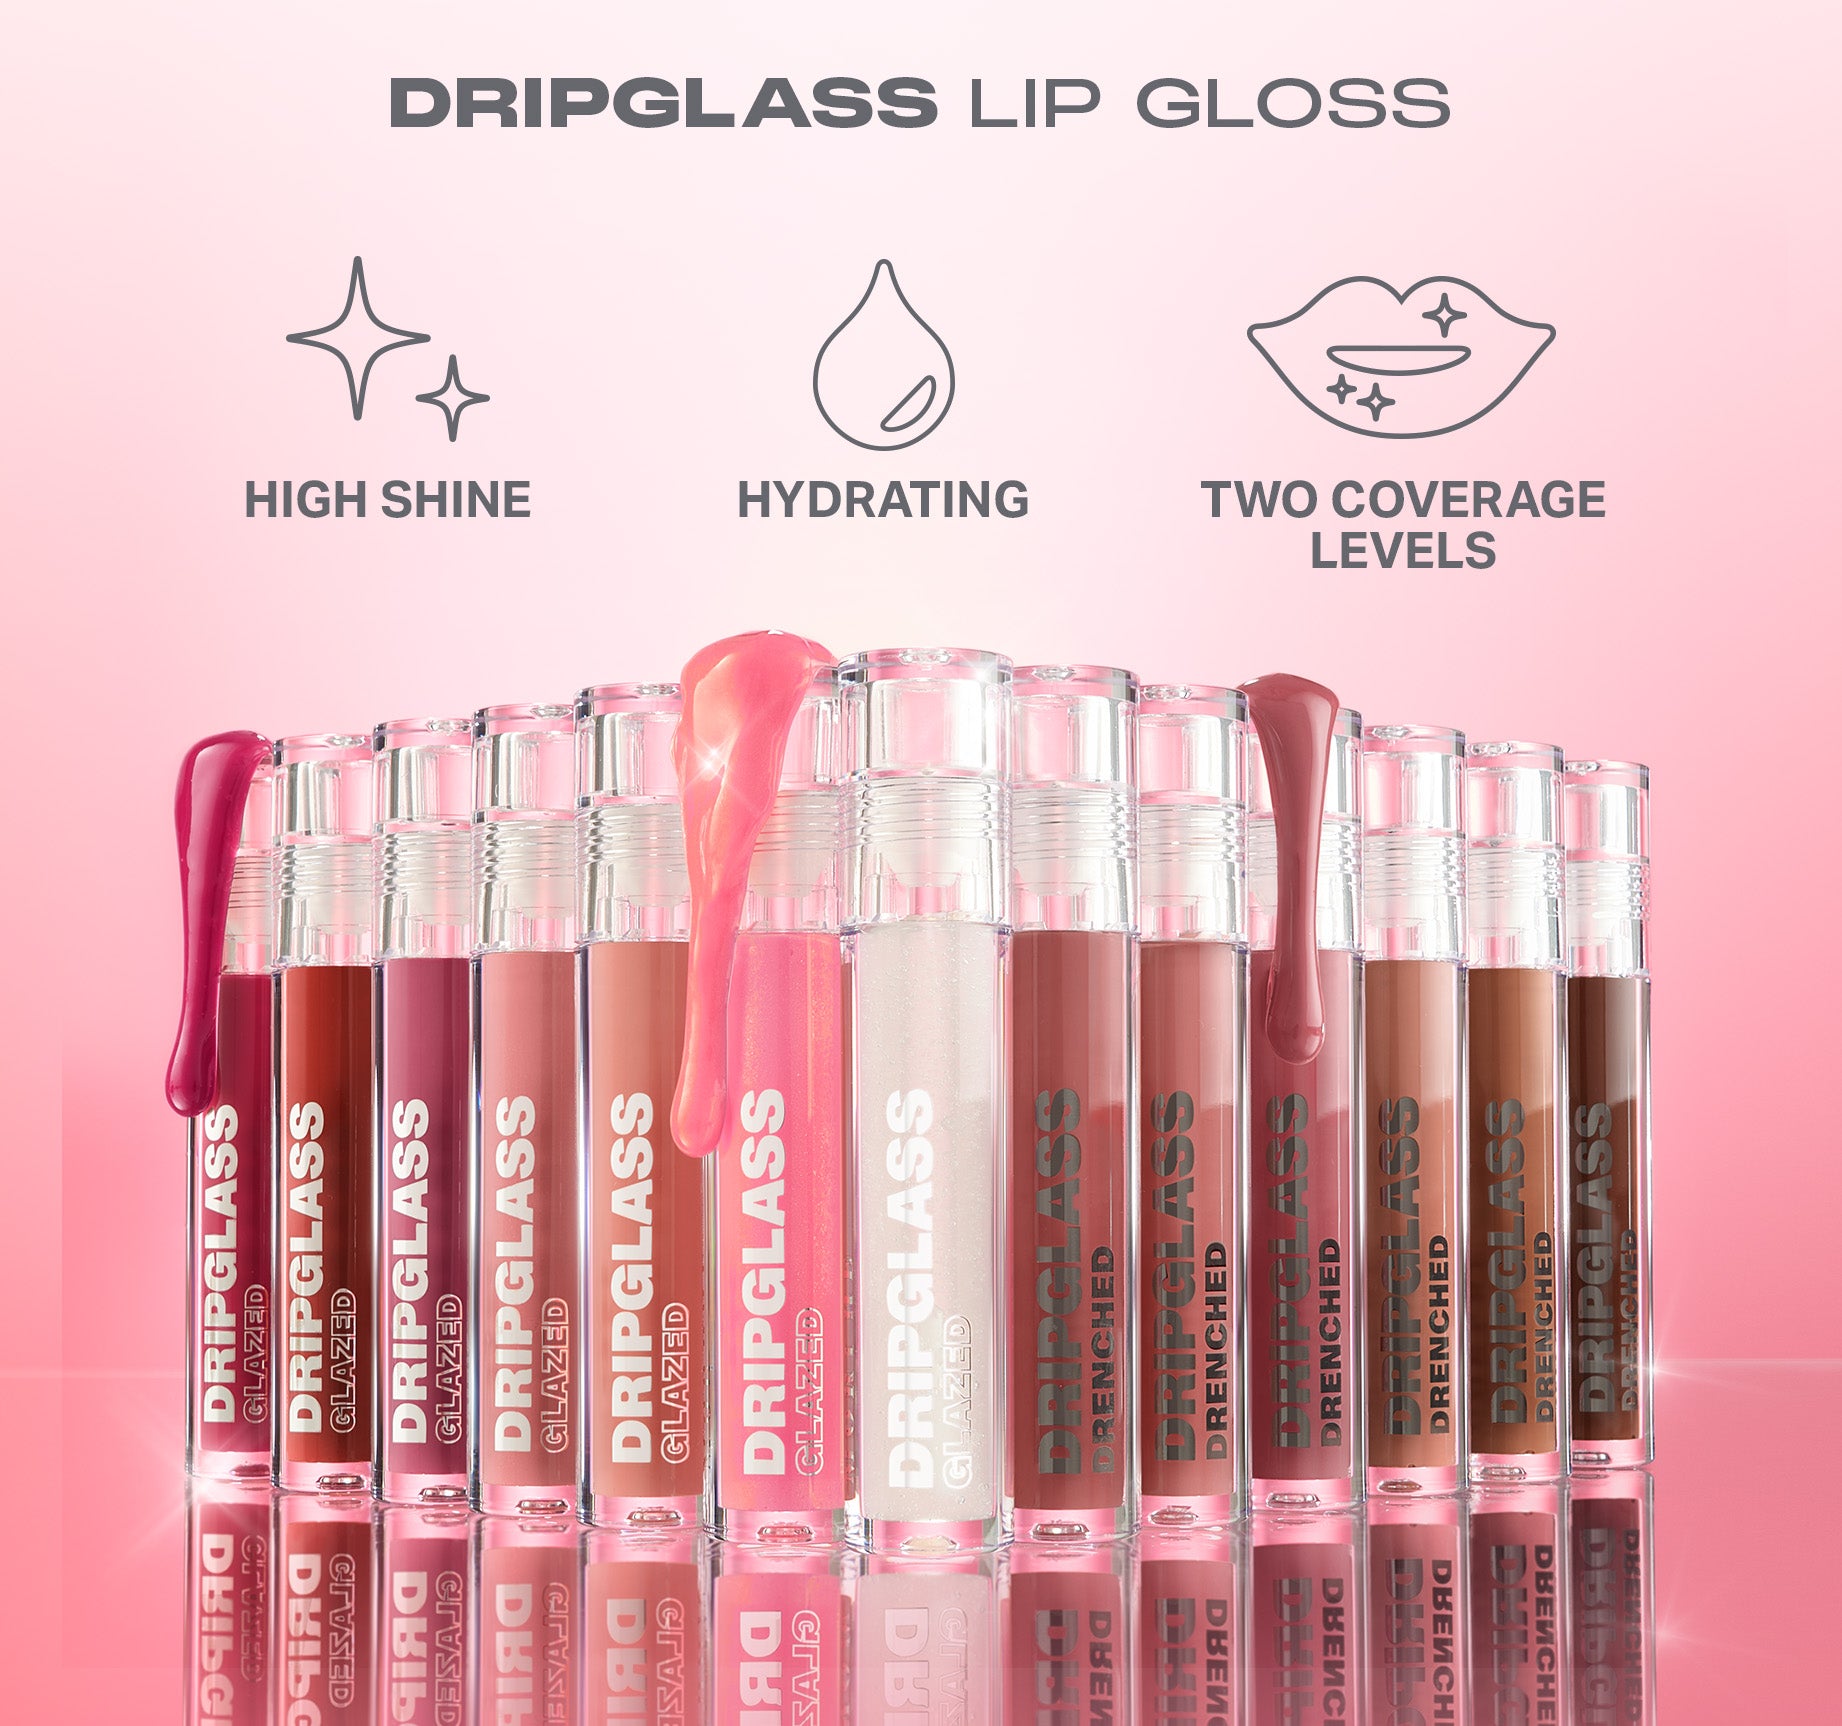 Dripglass Glazed High Shine Lip Gloss - Berry Stained - Image 5